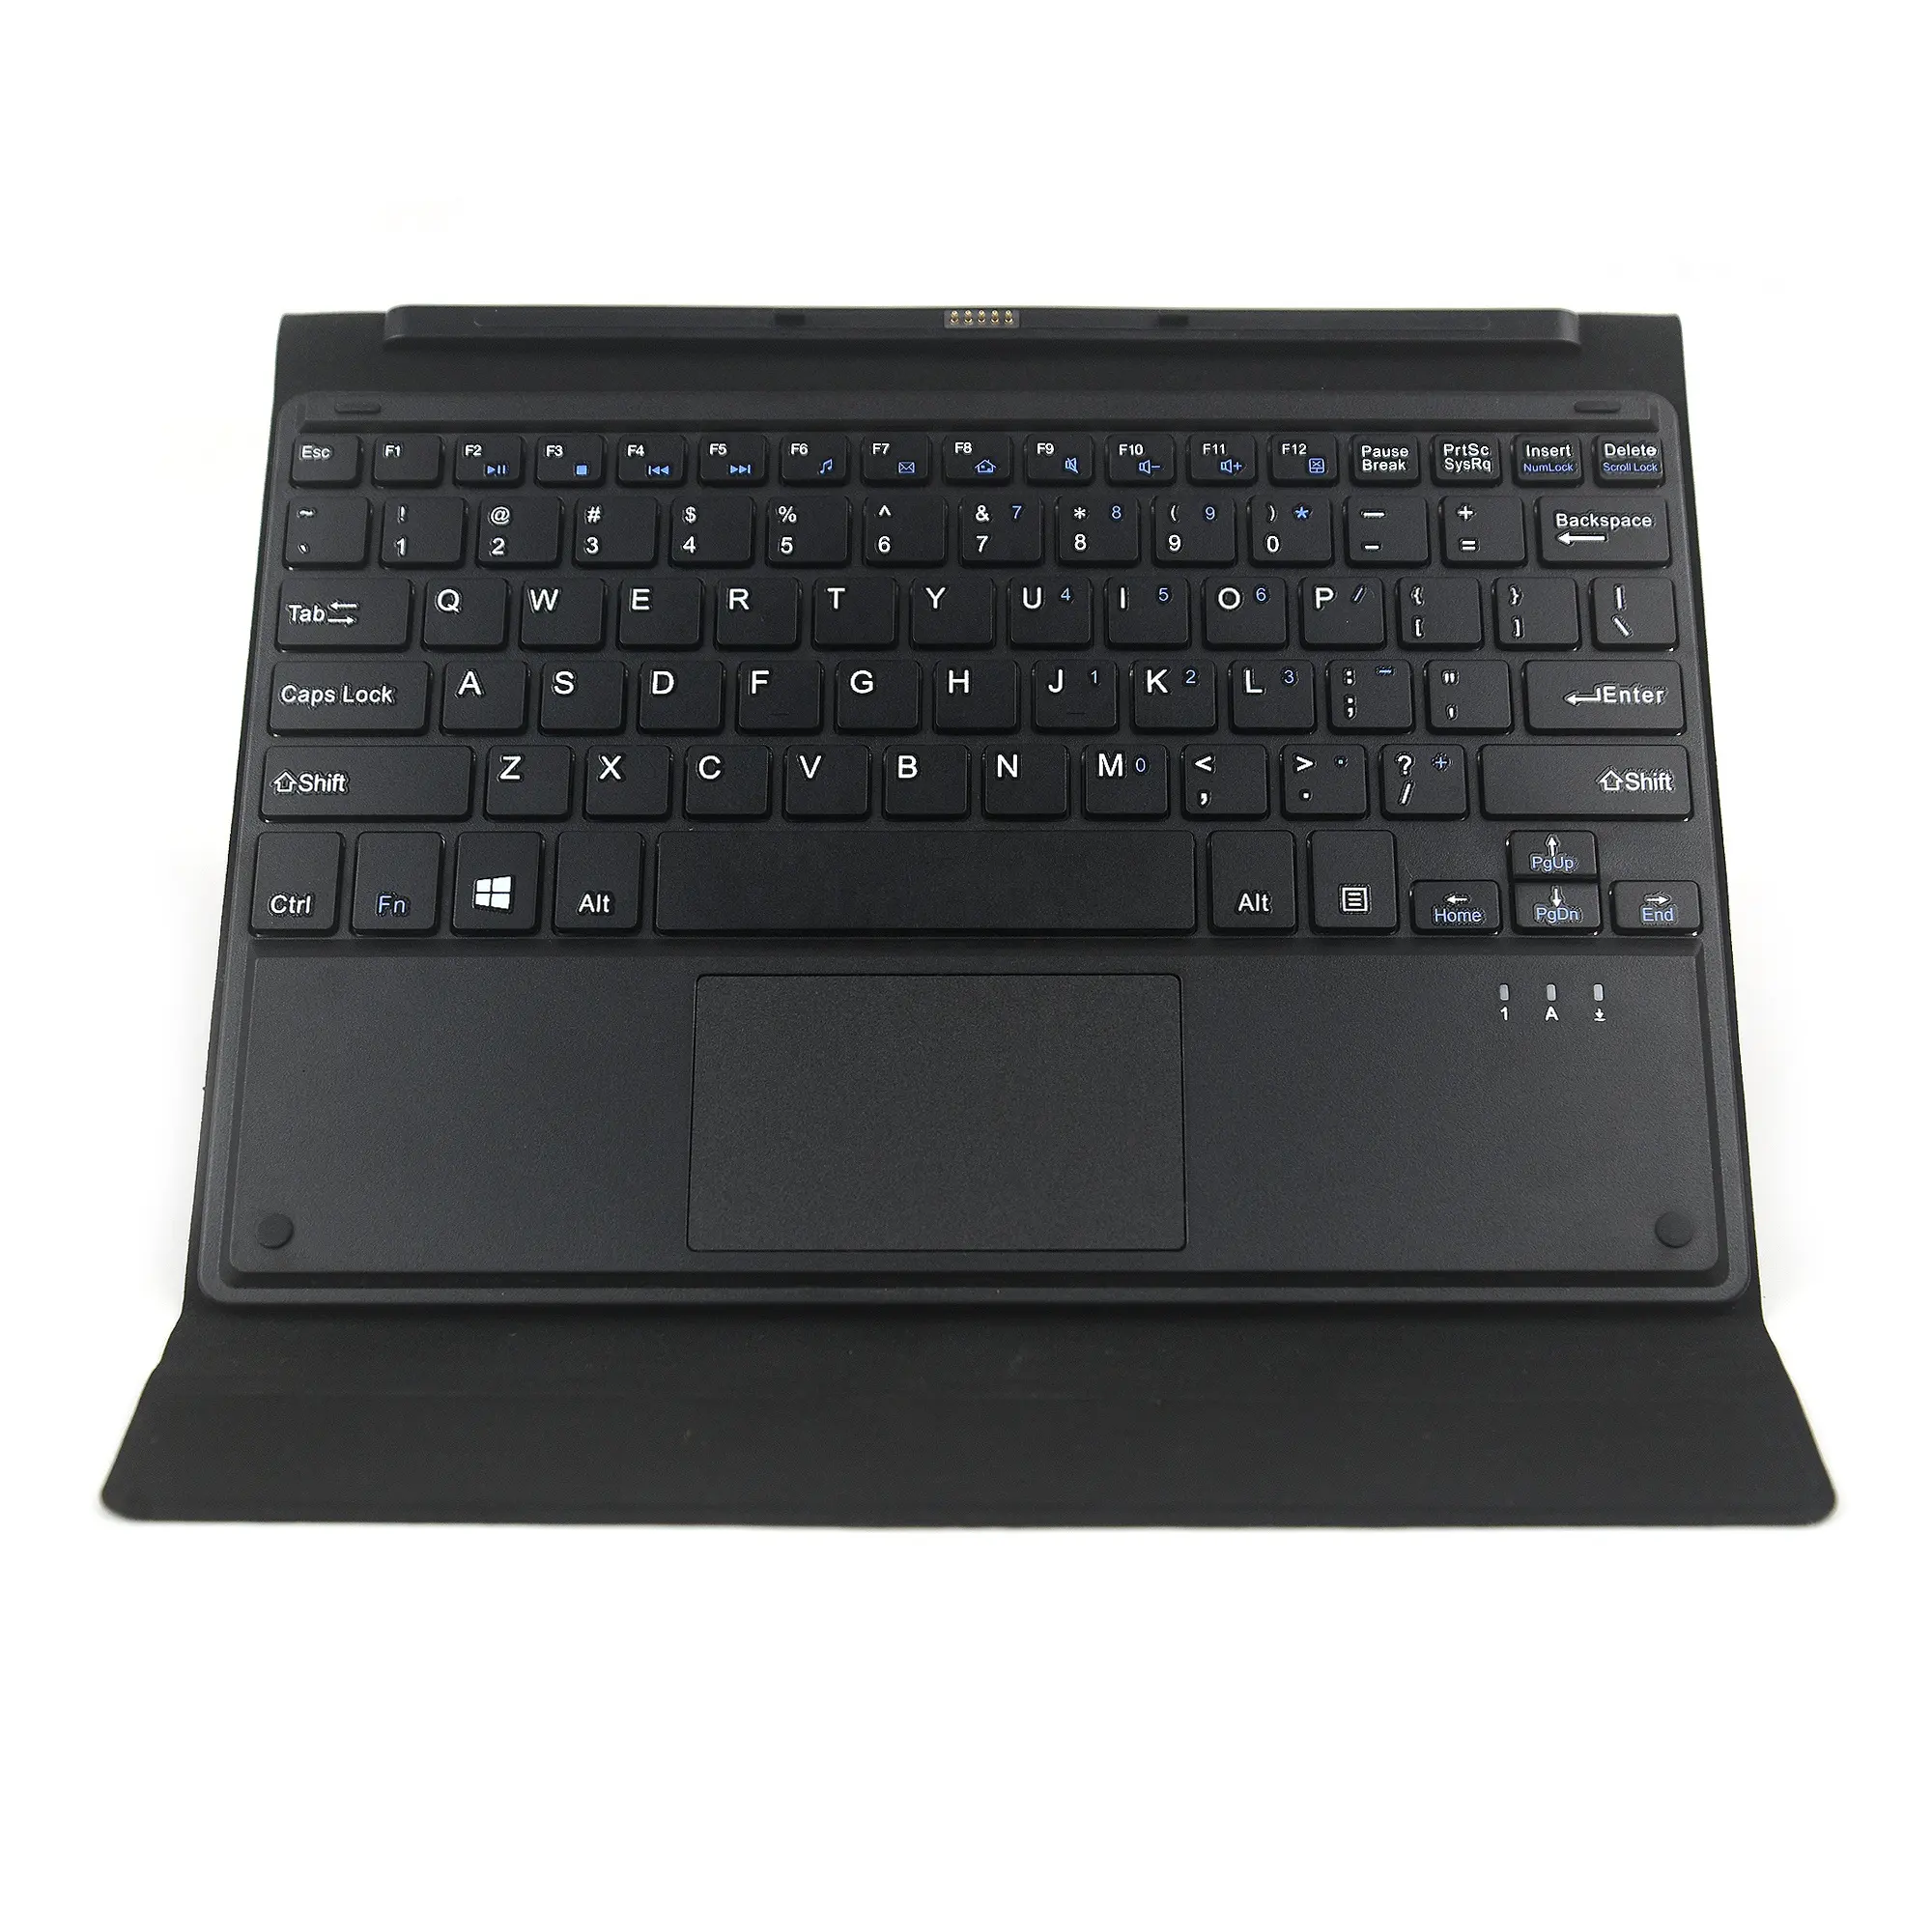 Tablet Wireless Keyboard Case with touchpad for surface pro 3 keyboard